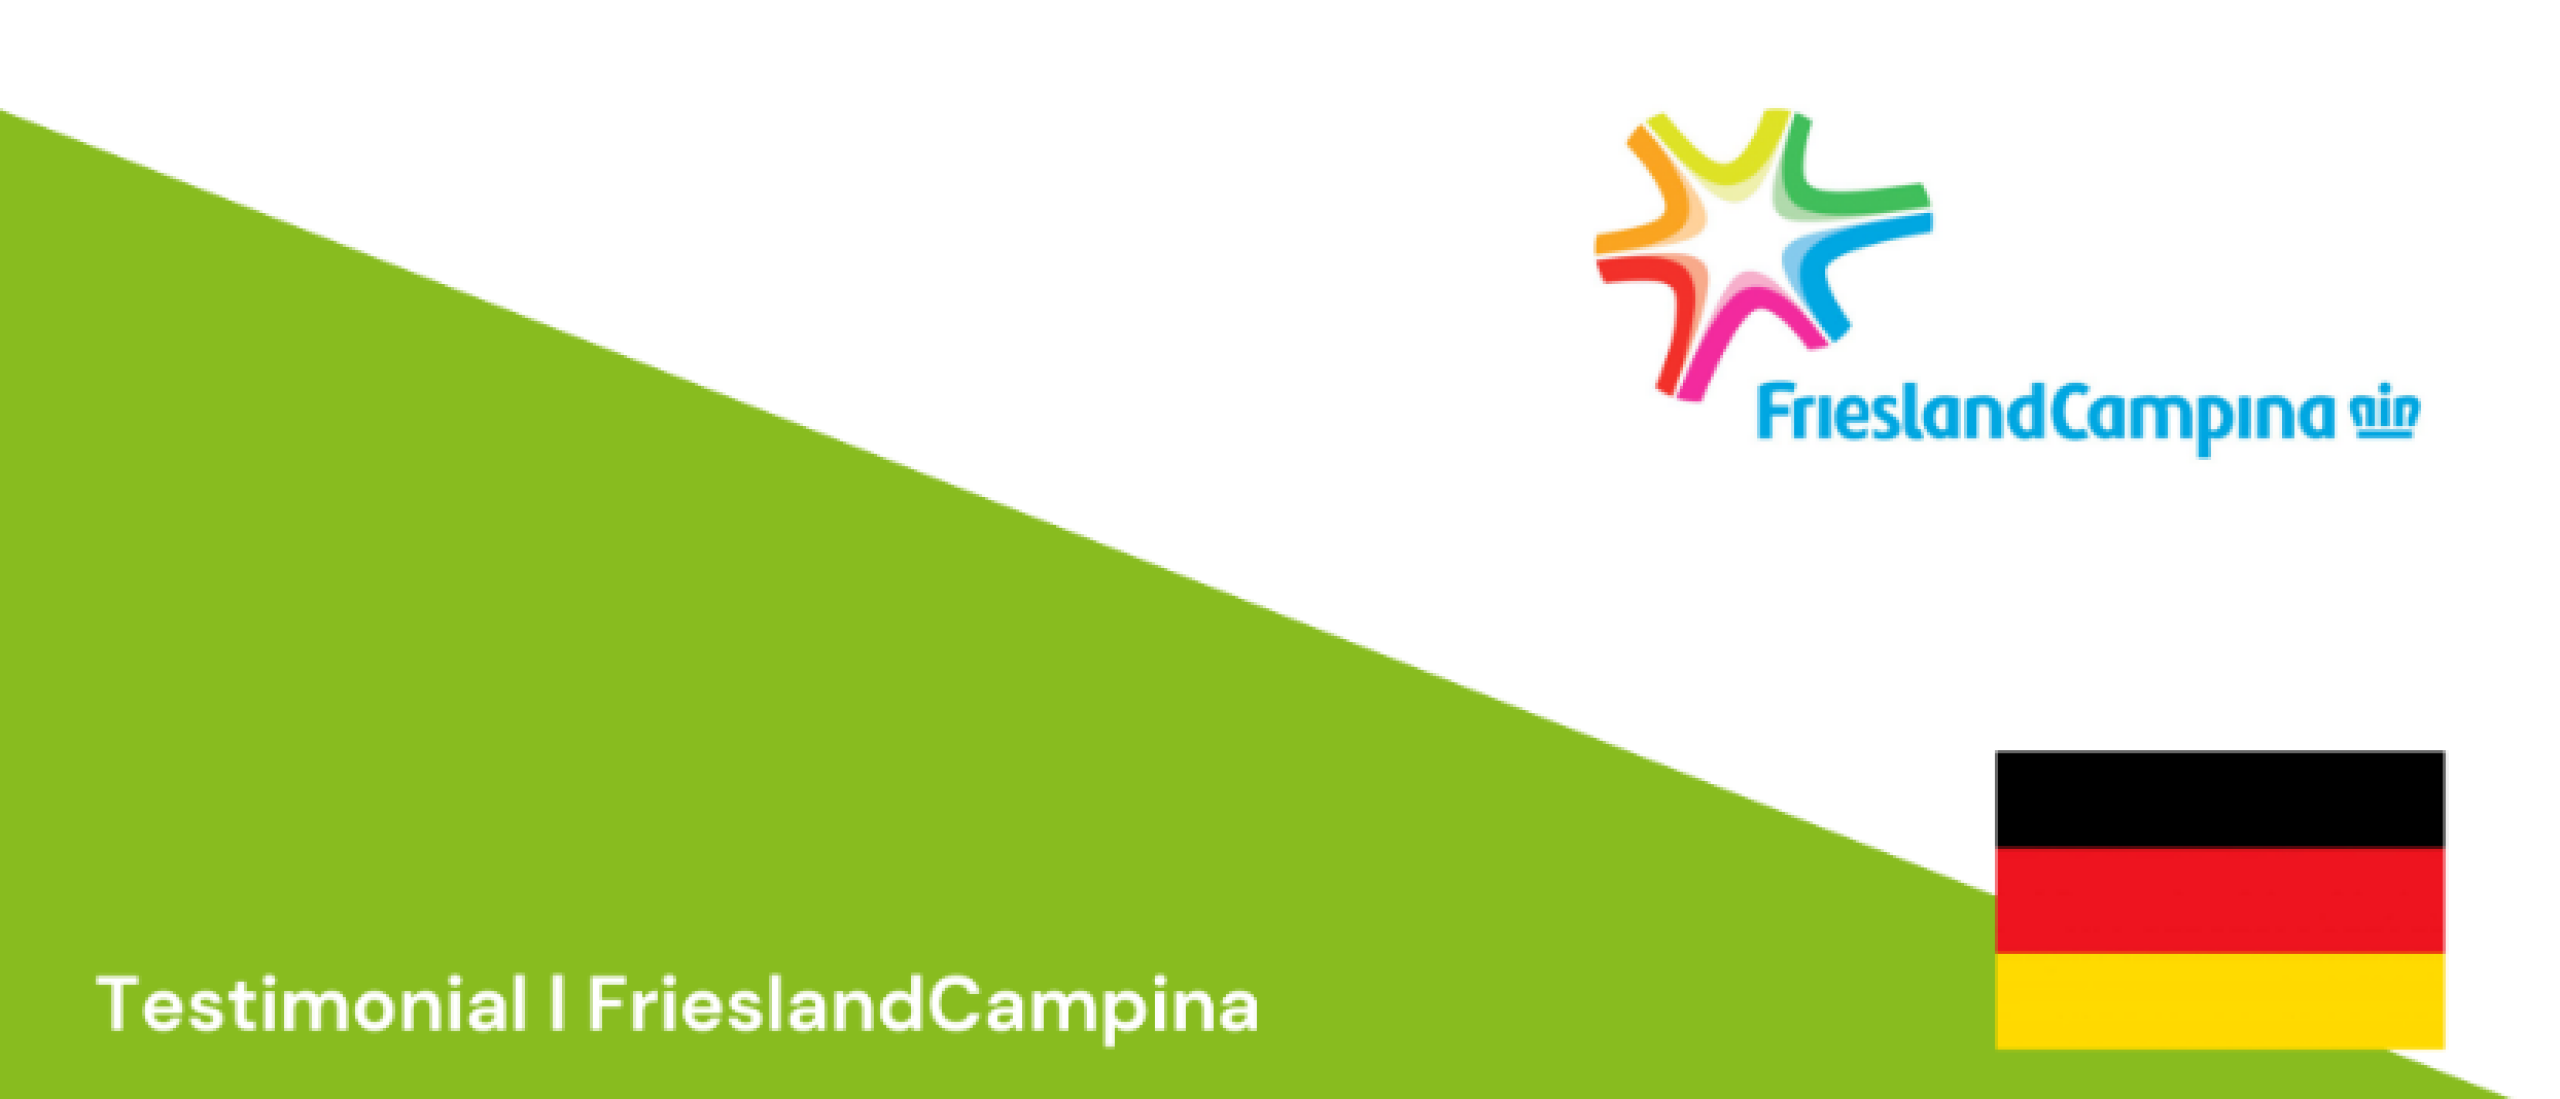 How real-life test data helps FrieslandCampina to innovate more effectively